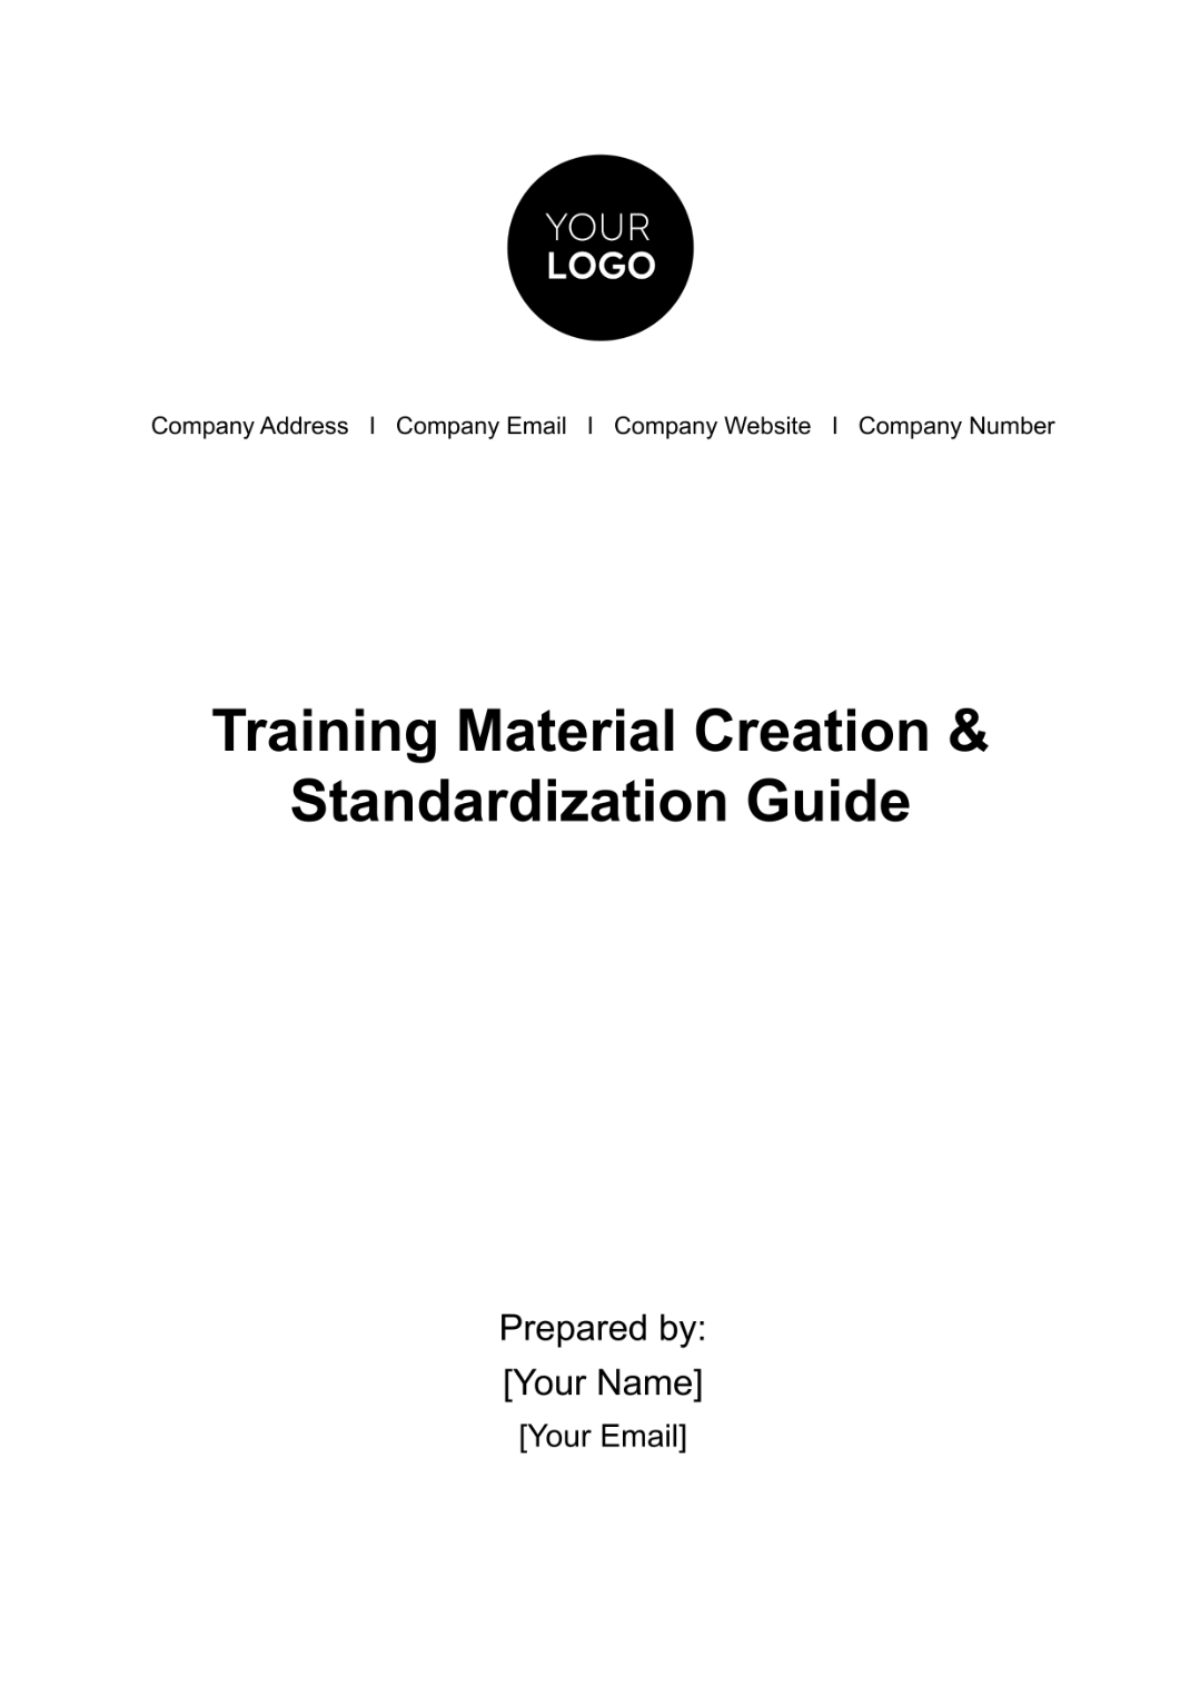 Free Training Material Creation & Standardization Guide HR Template